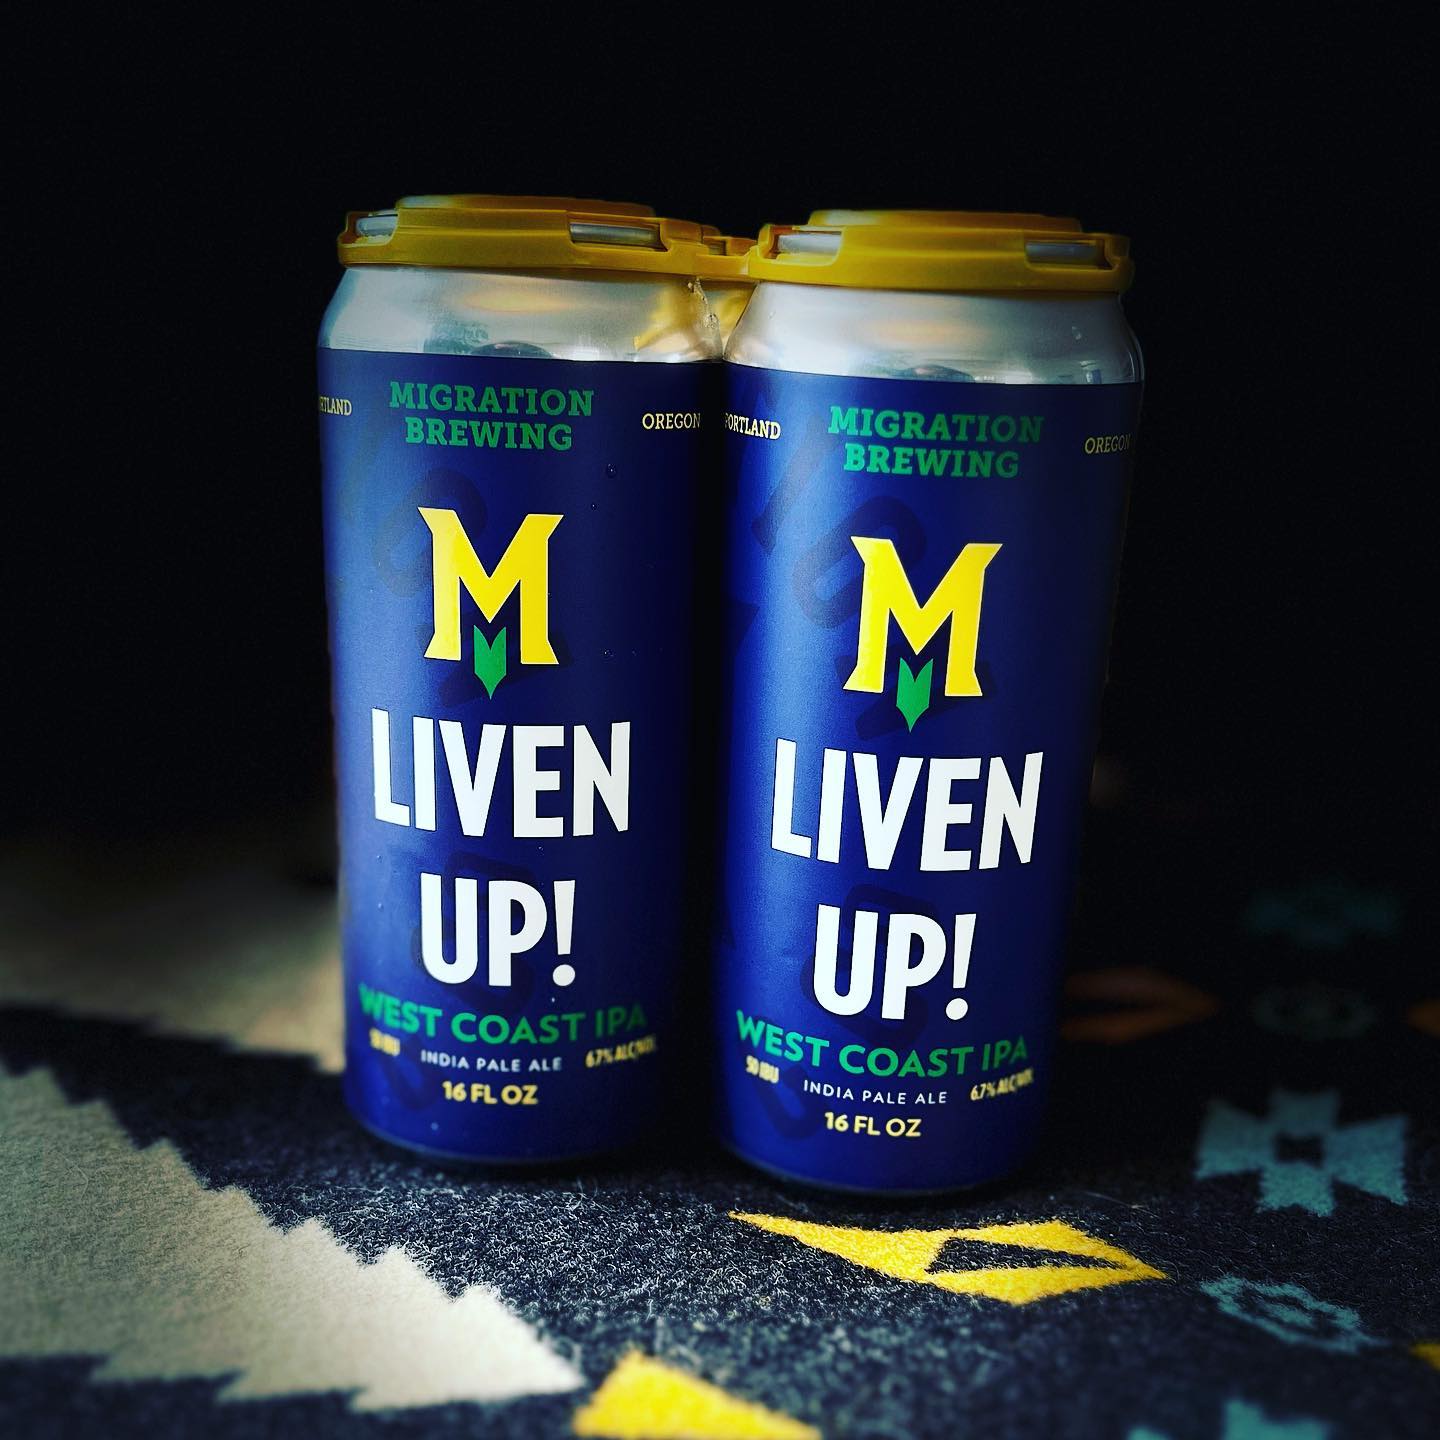 image of Liven Up! IPA courtesy of Migration Brewing